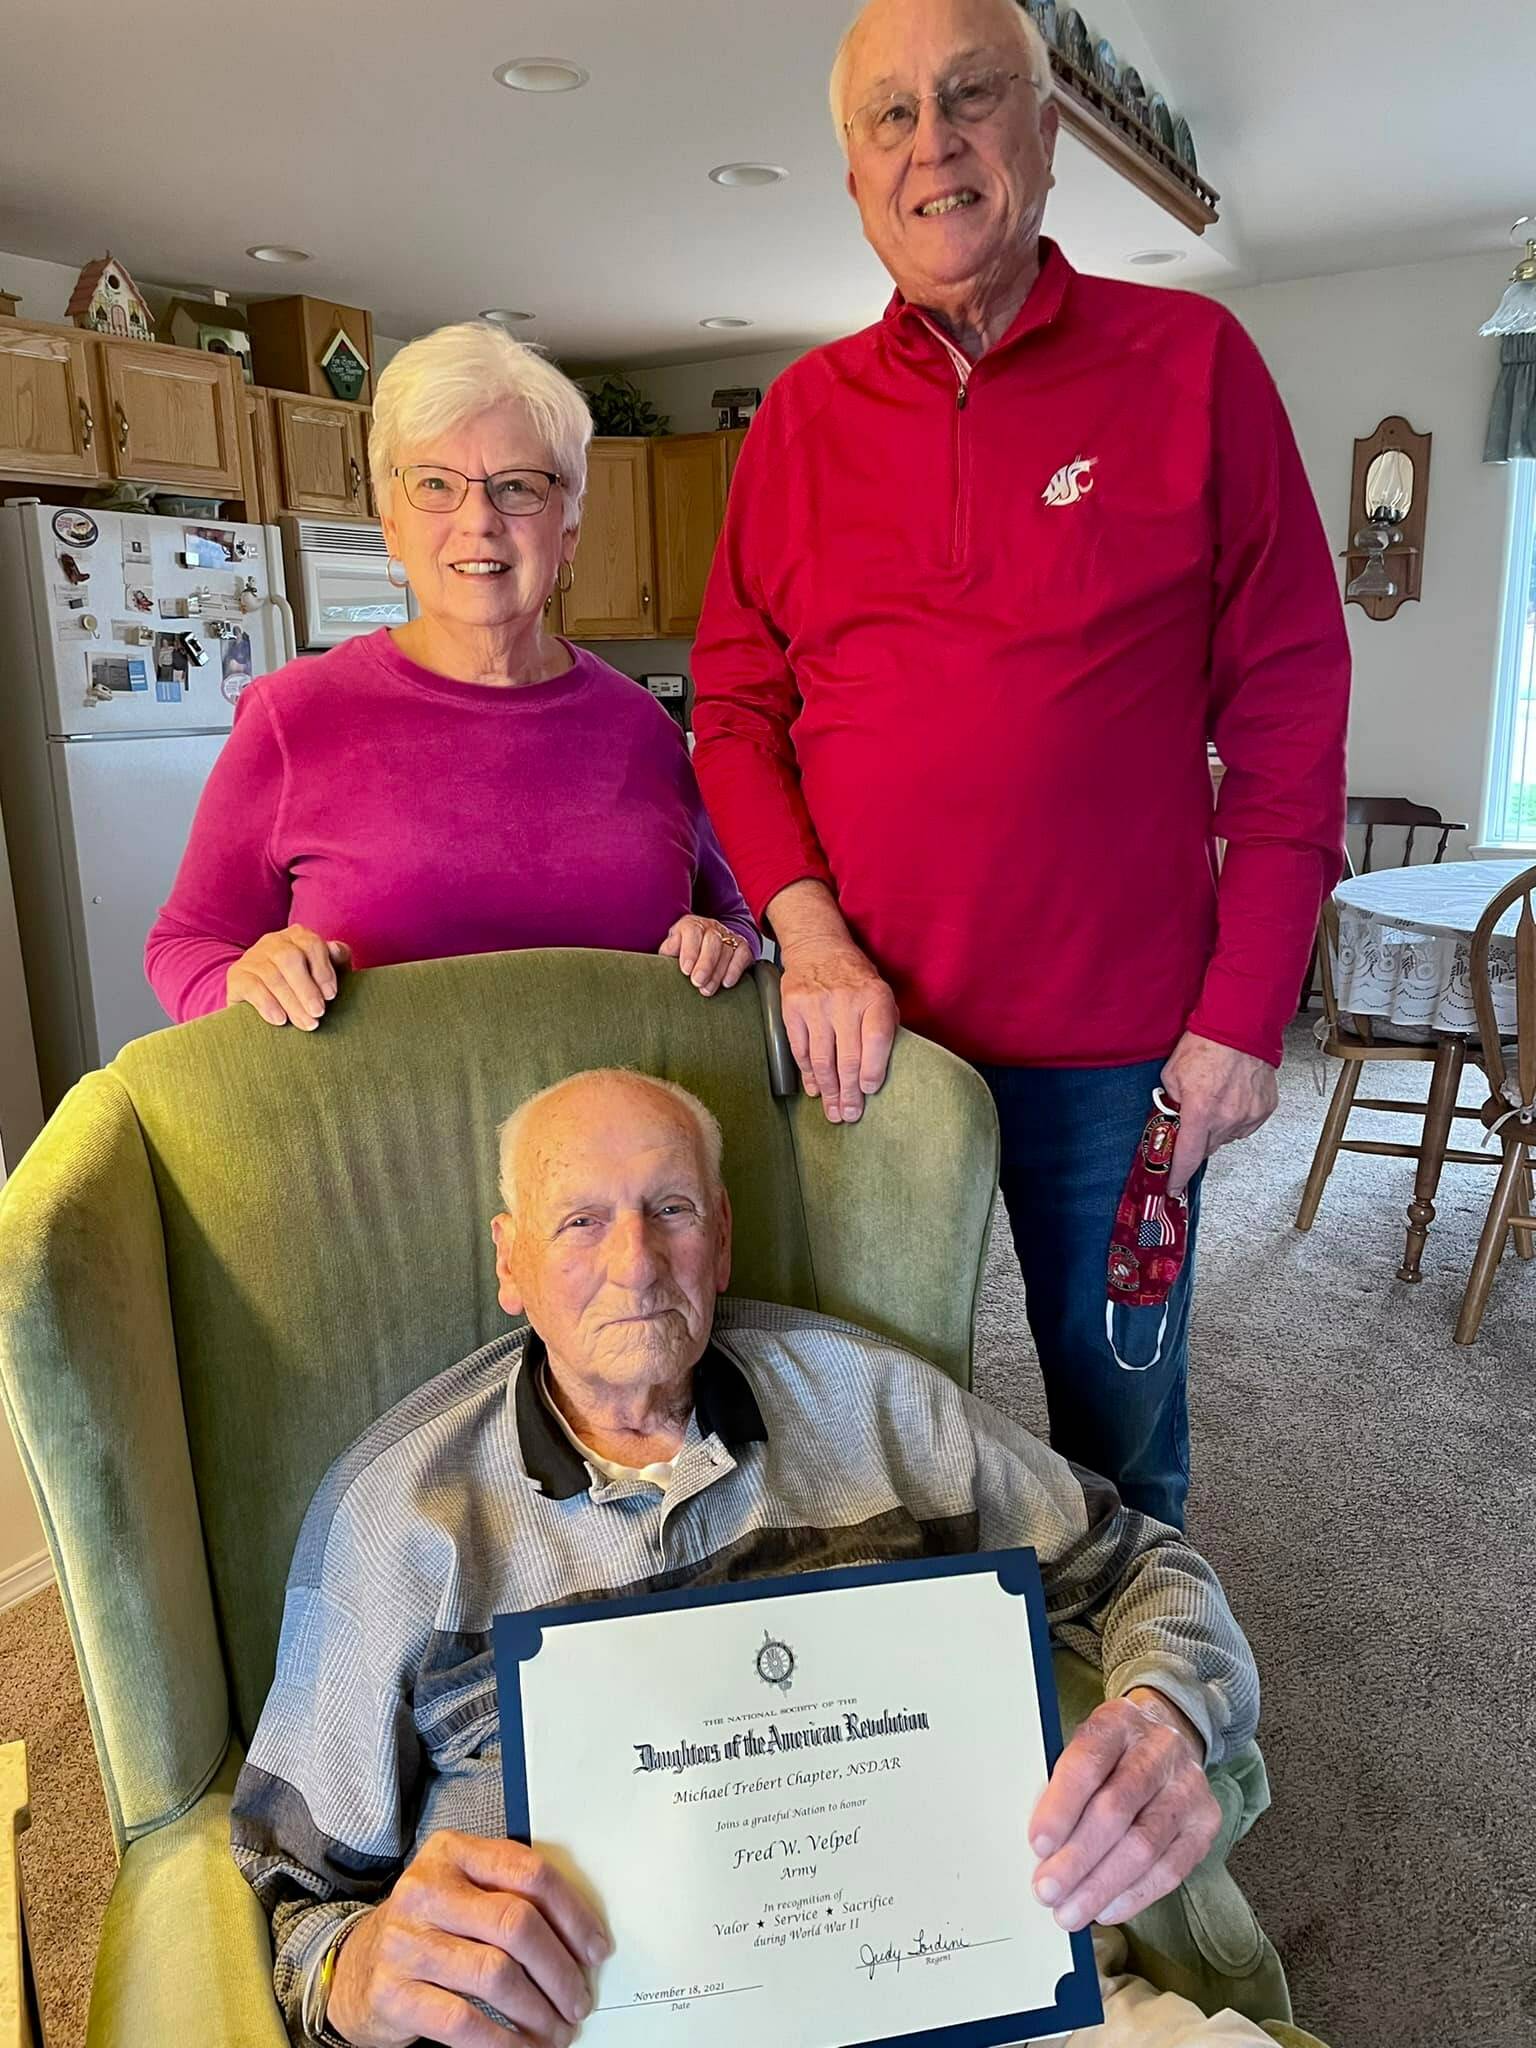 Fred Velpel, a World War II veteran (U.S. Army), receives a commemorative National Society of the Daughters of the American Revolution “thank you for your service” certificate. Submitted photo